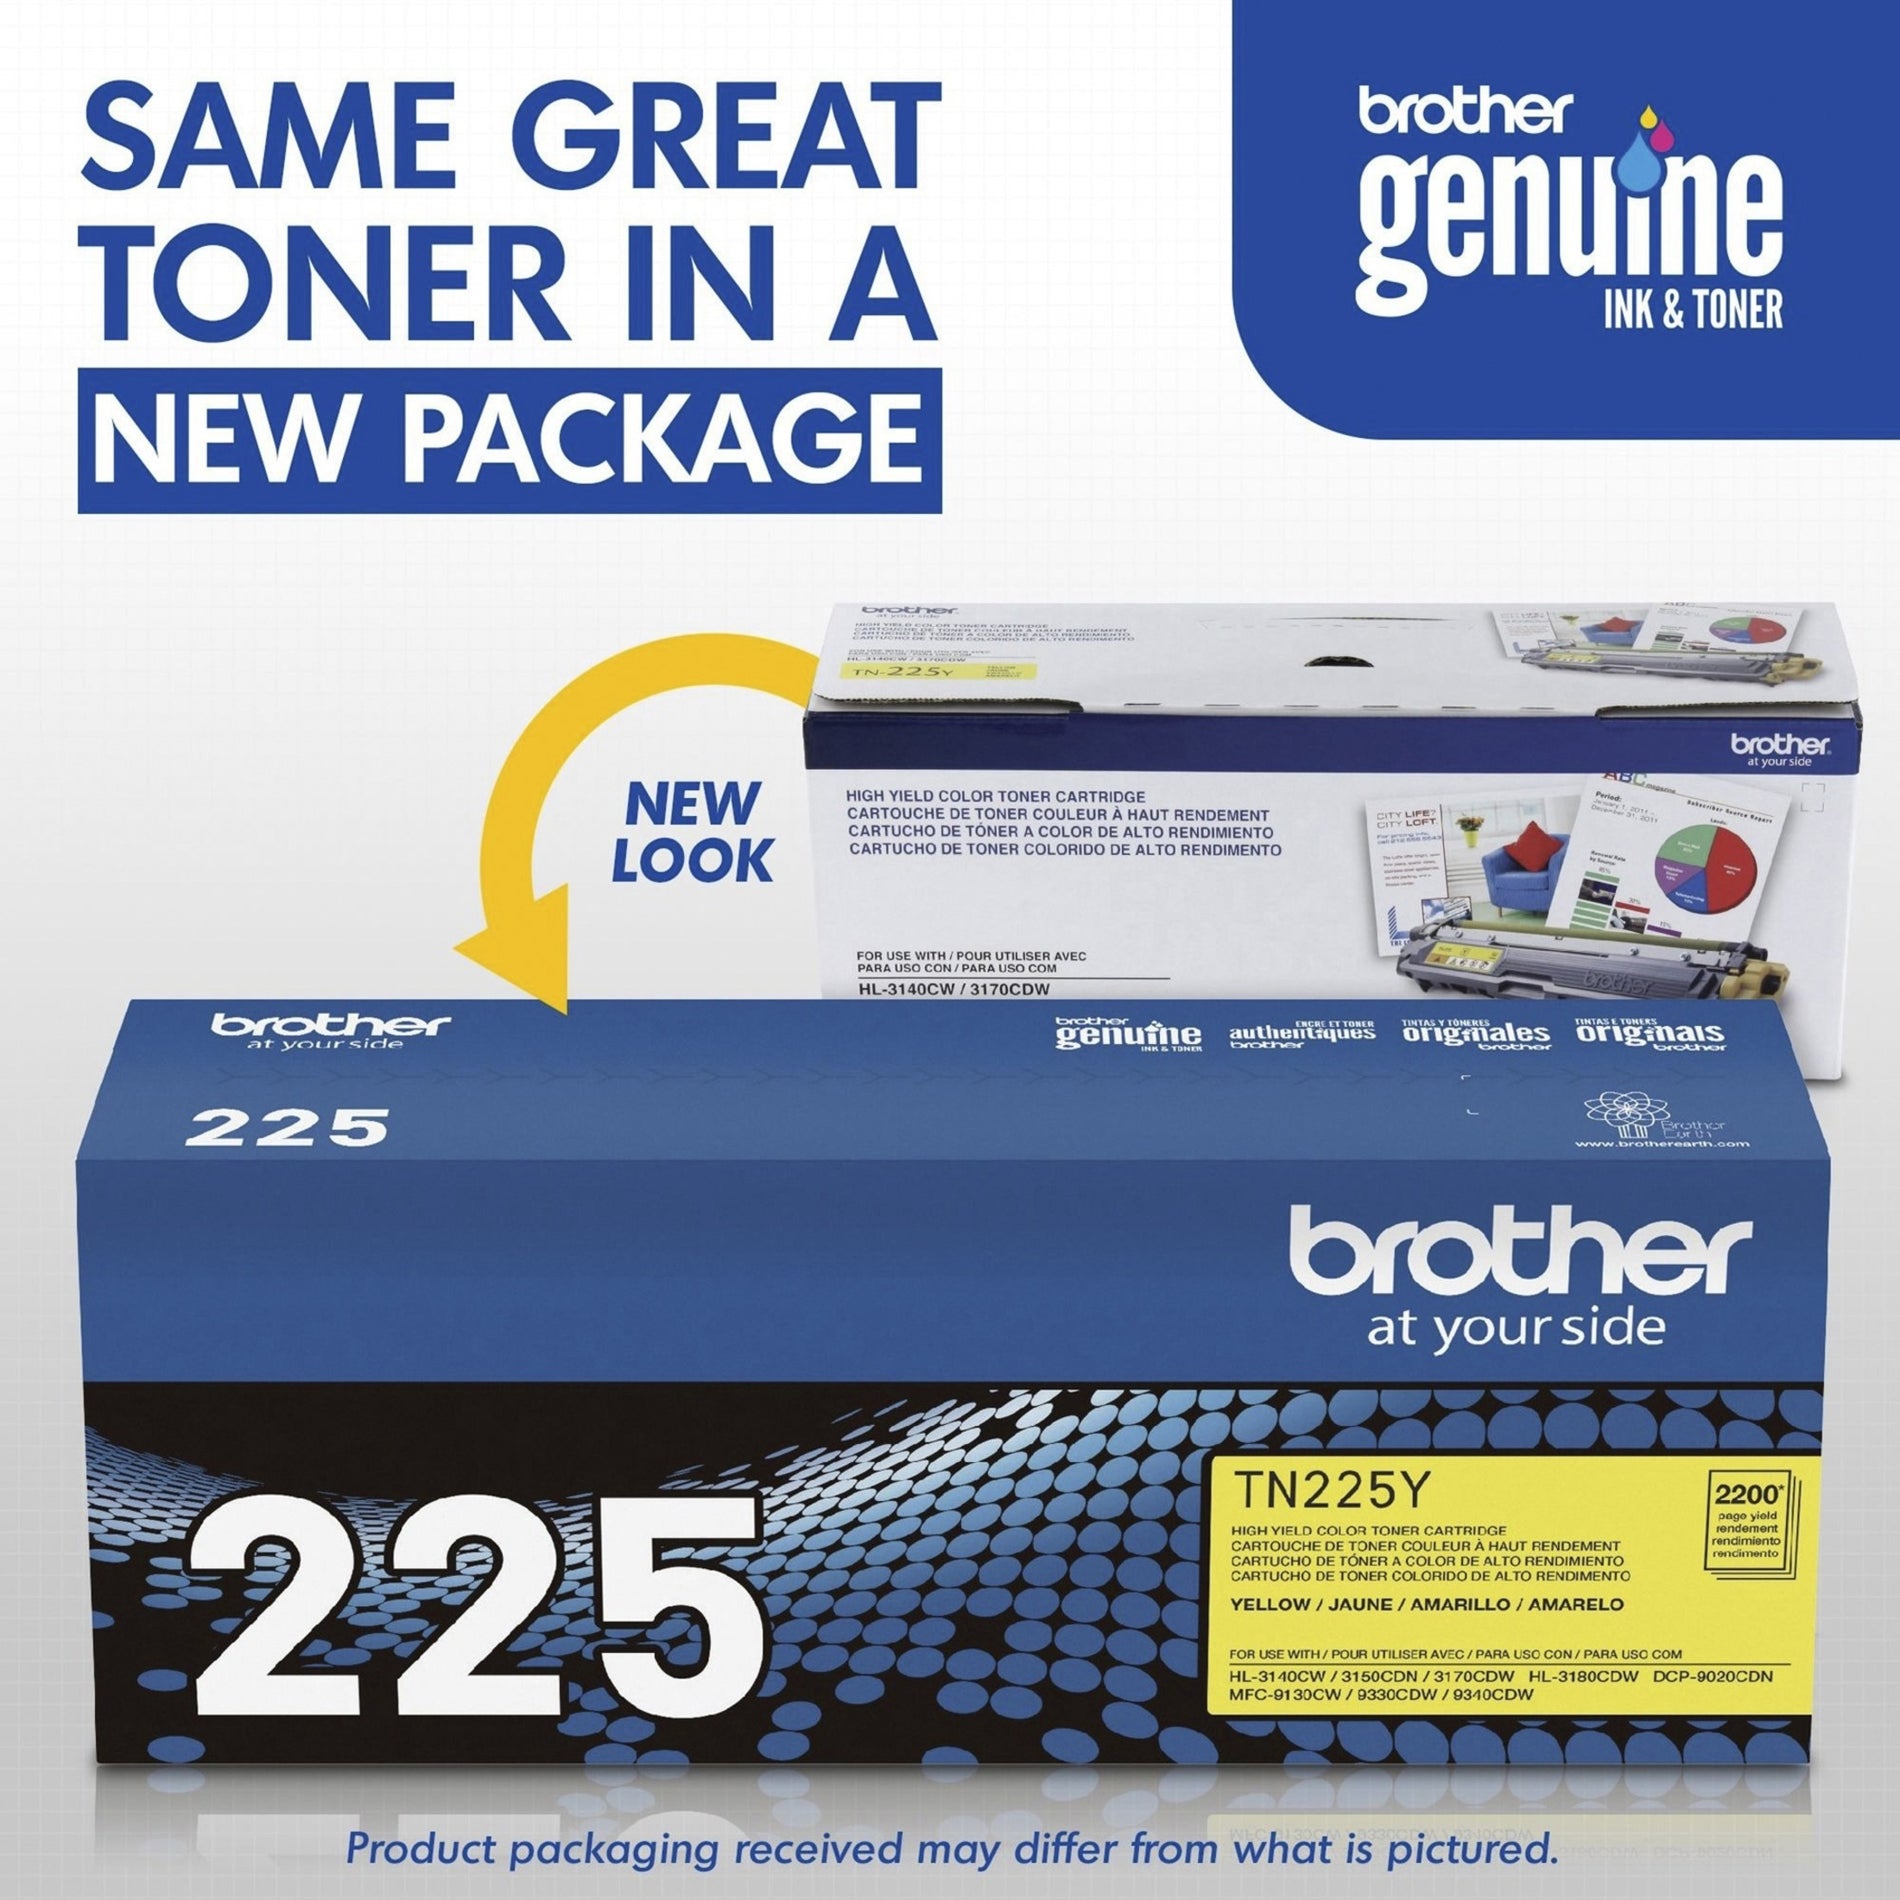 Brother TN225Y Toner Cartridge, High Yield, Yellow, 2200 Page Yield